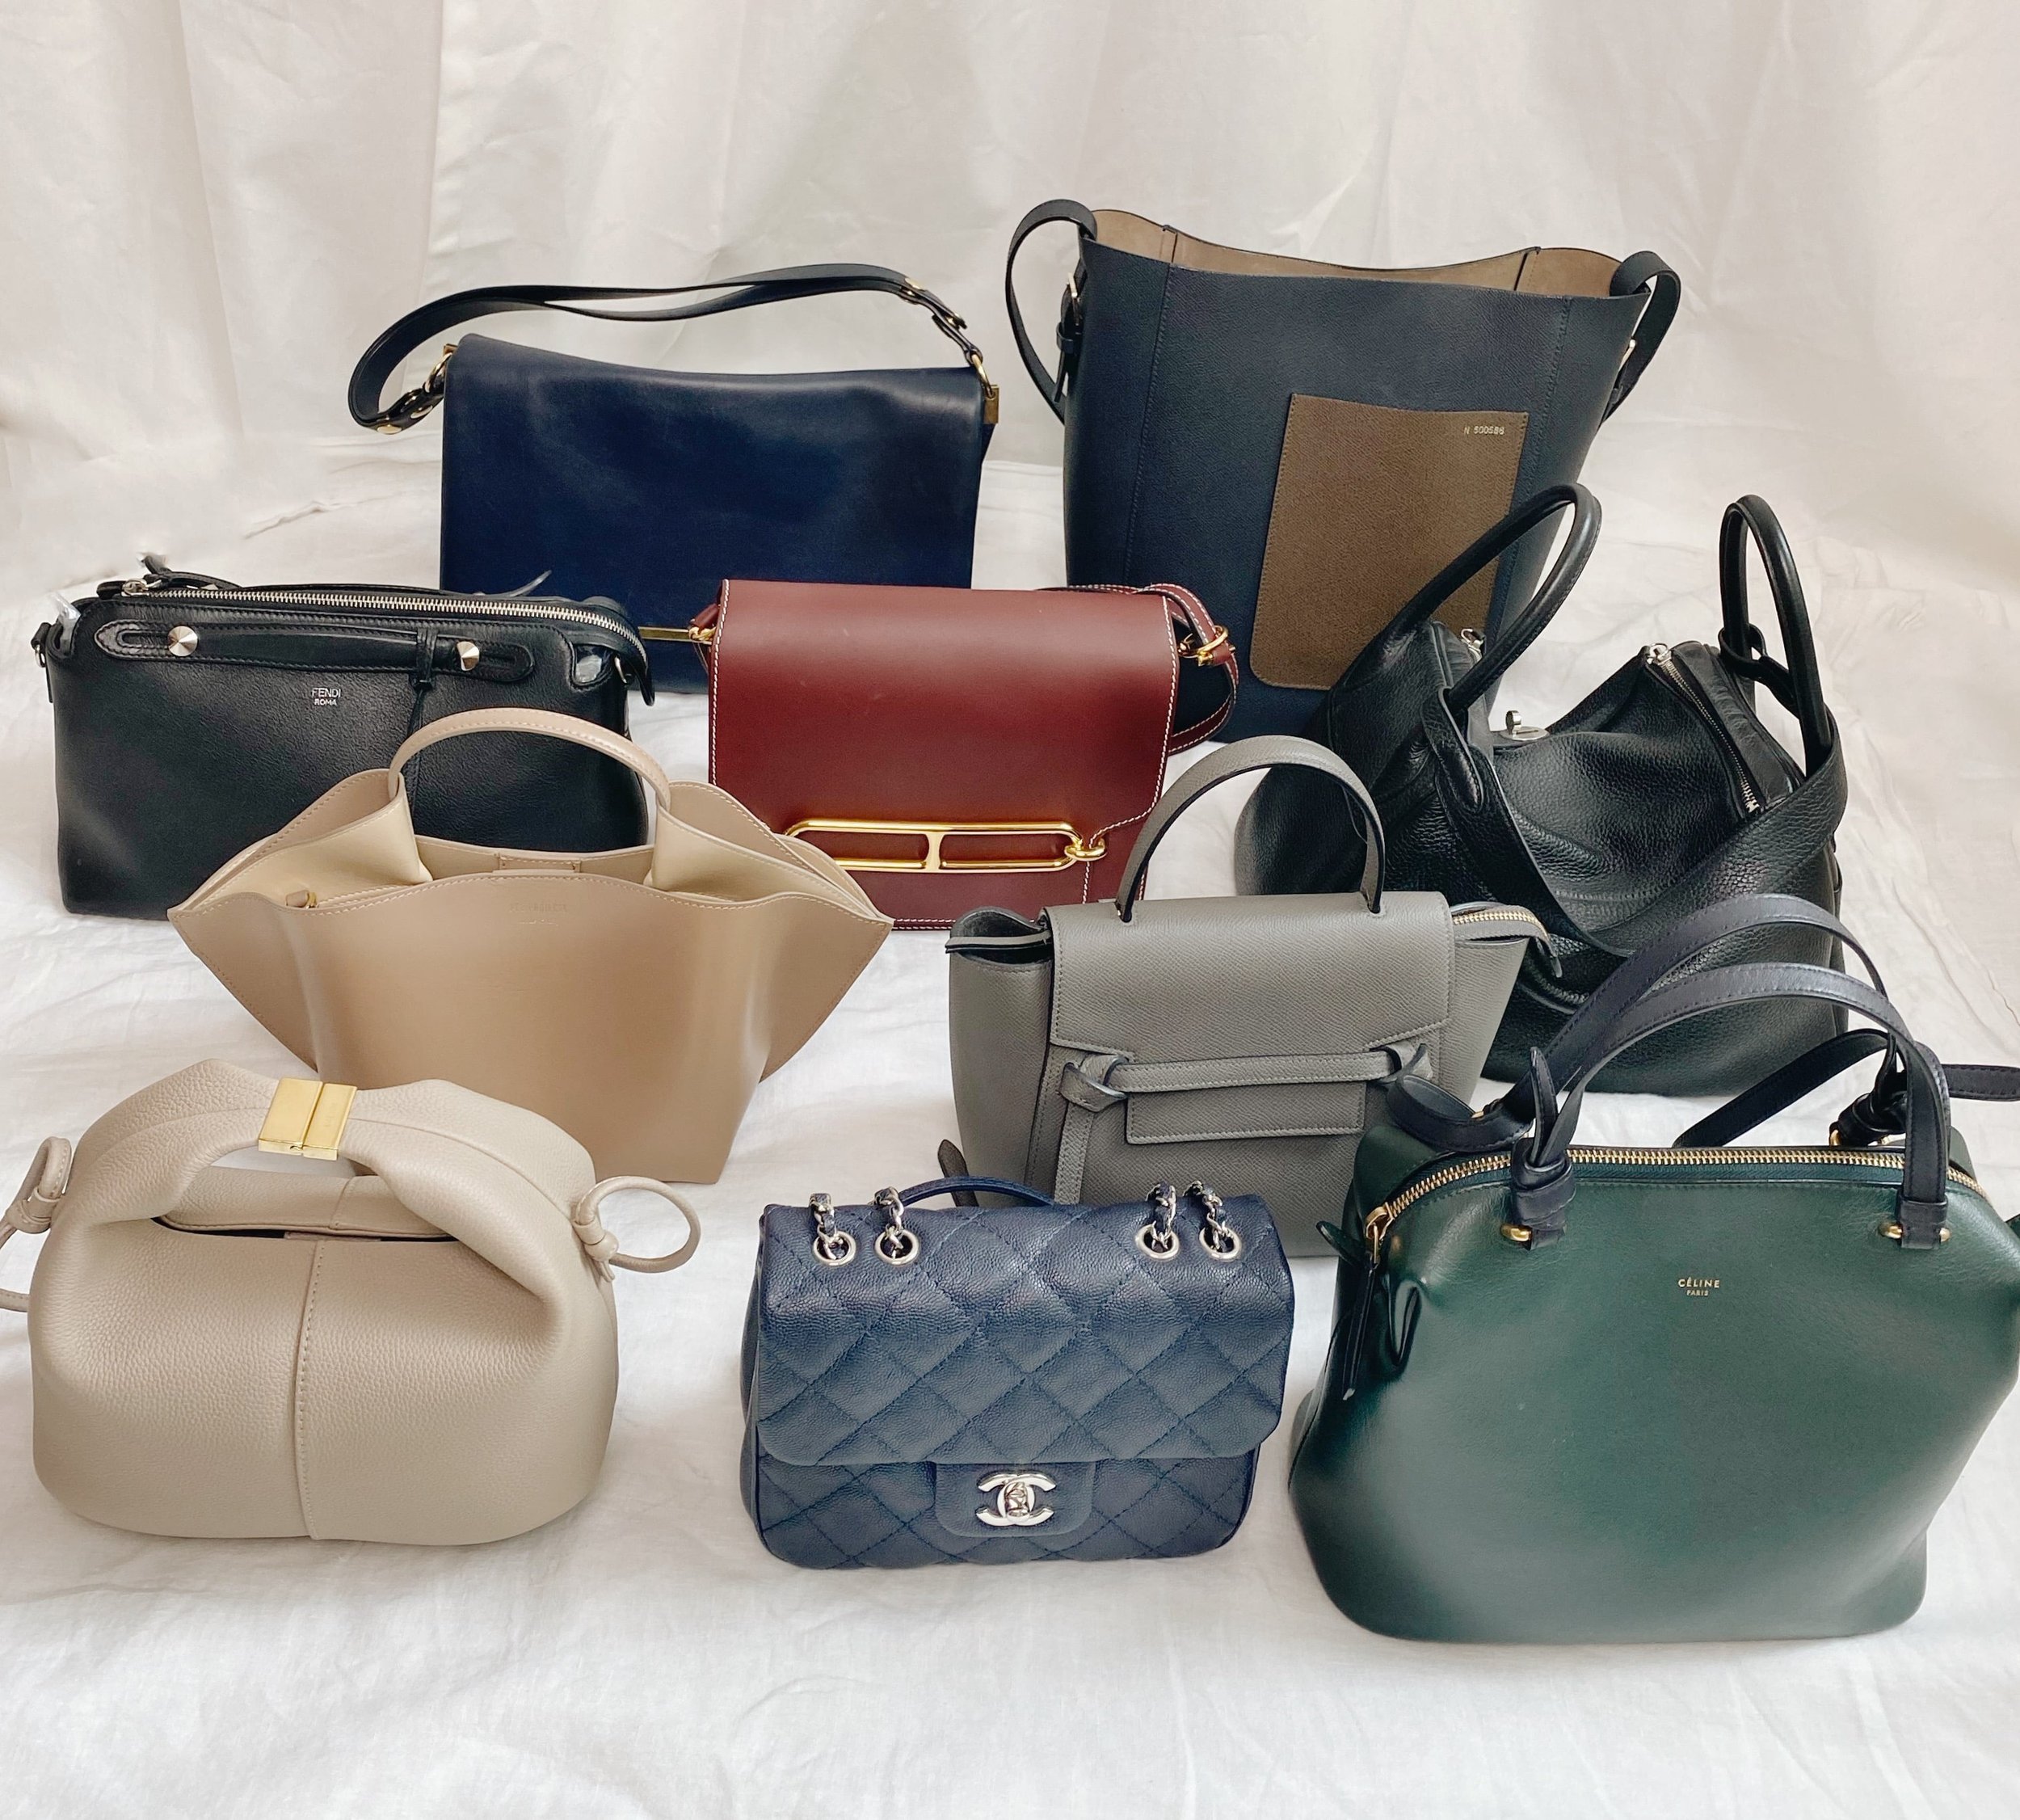 Last Look At My Office Space / Designer Handbag Collection Before